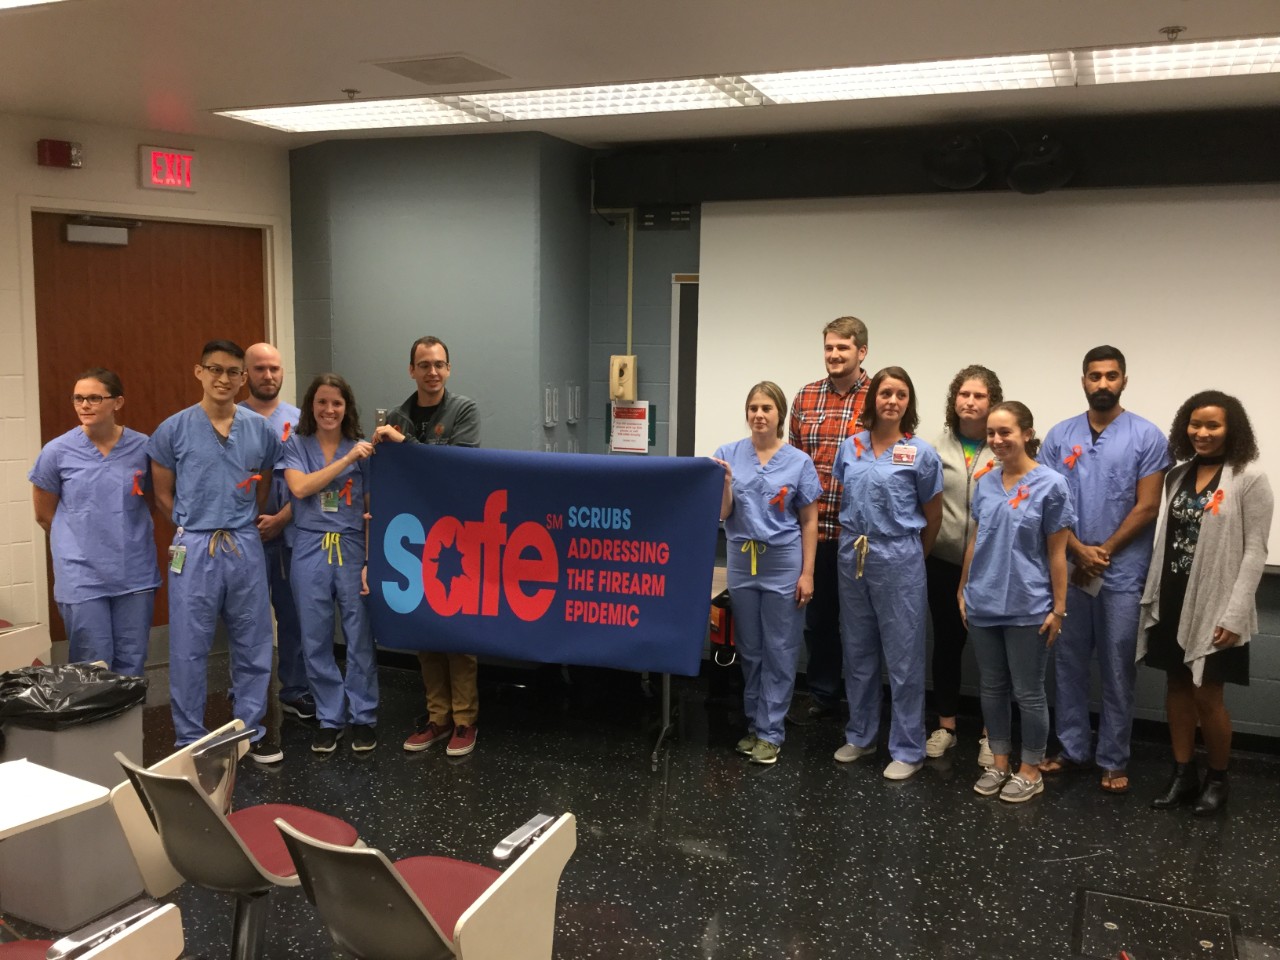 UC SAFE group shown at UC College of Medicine